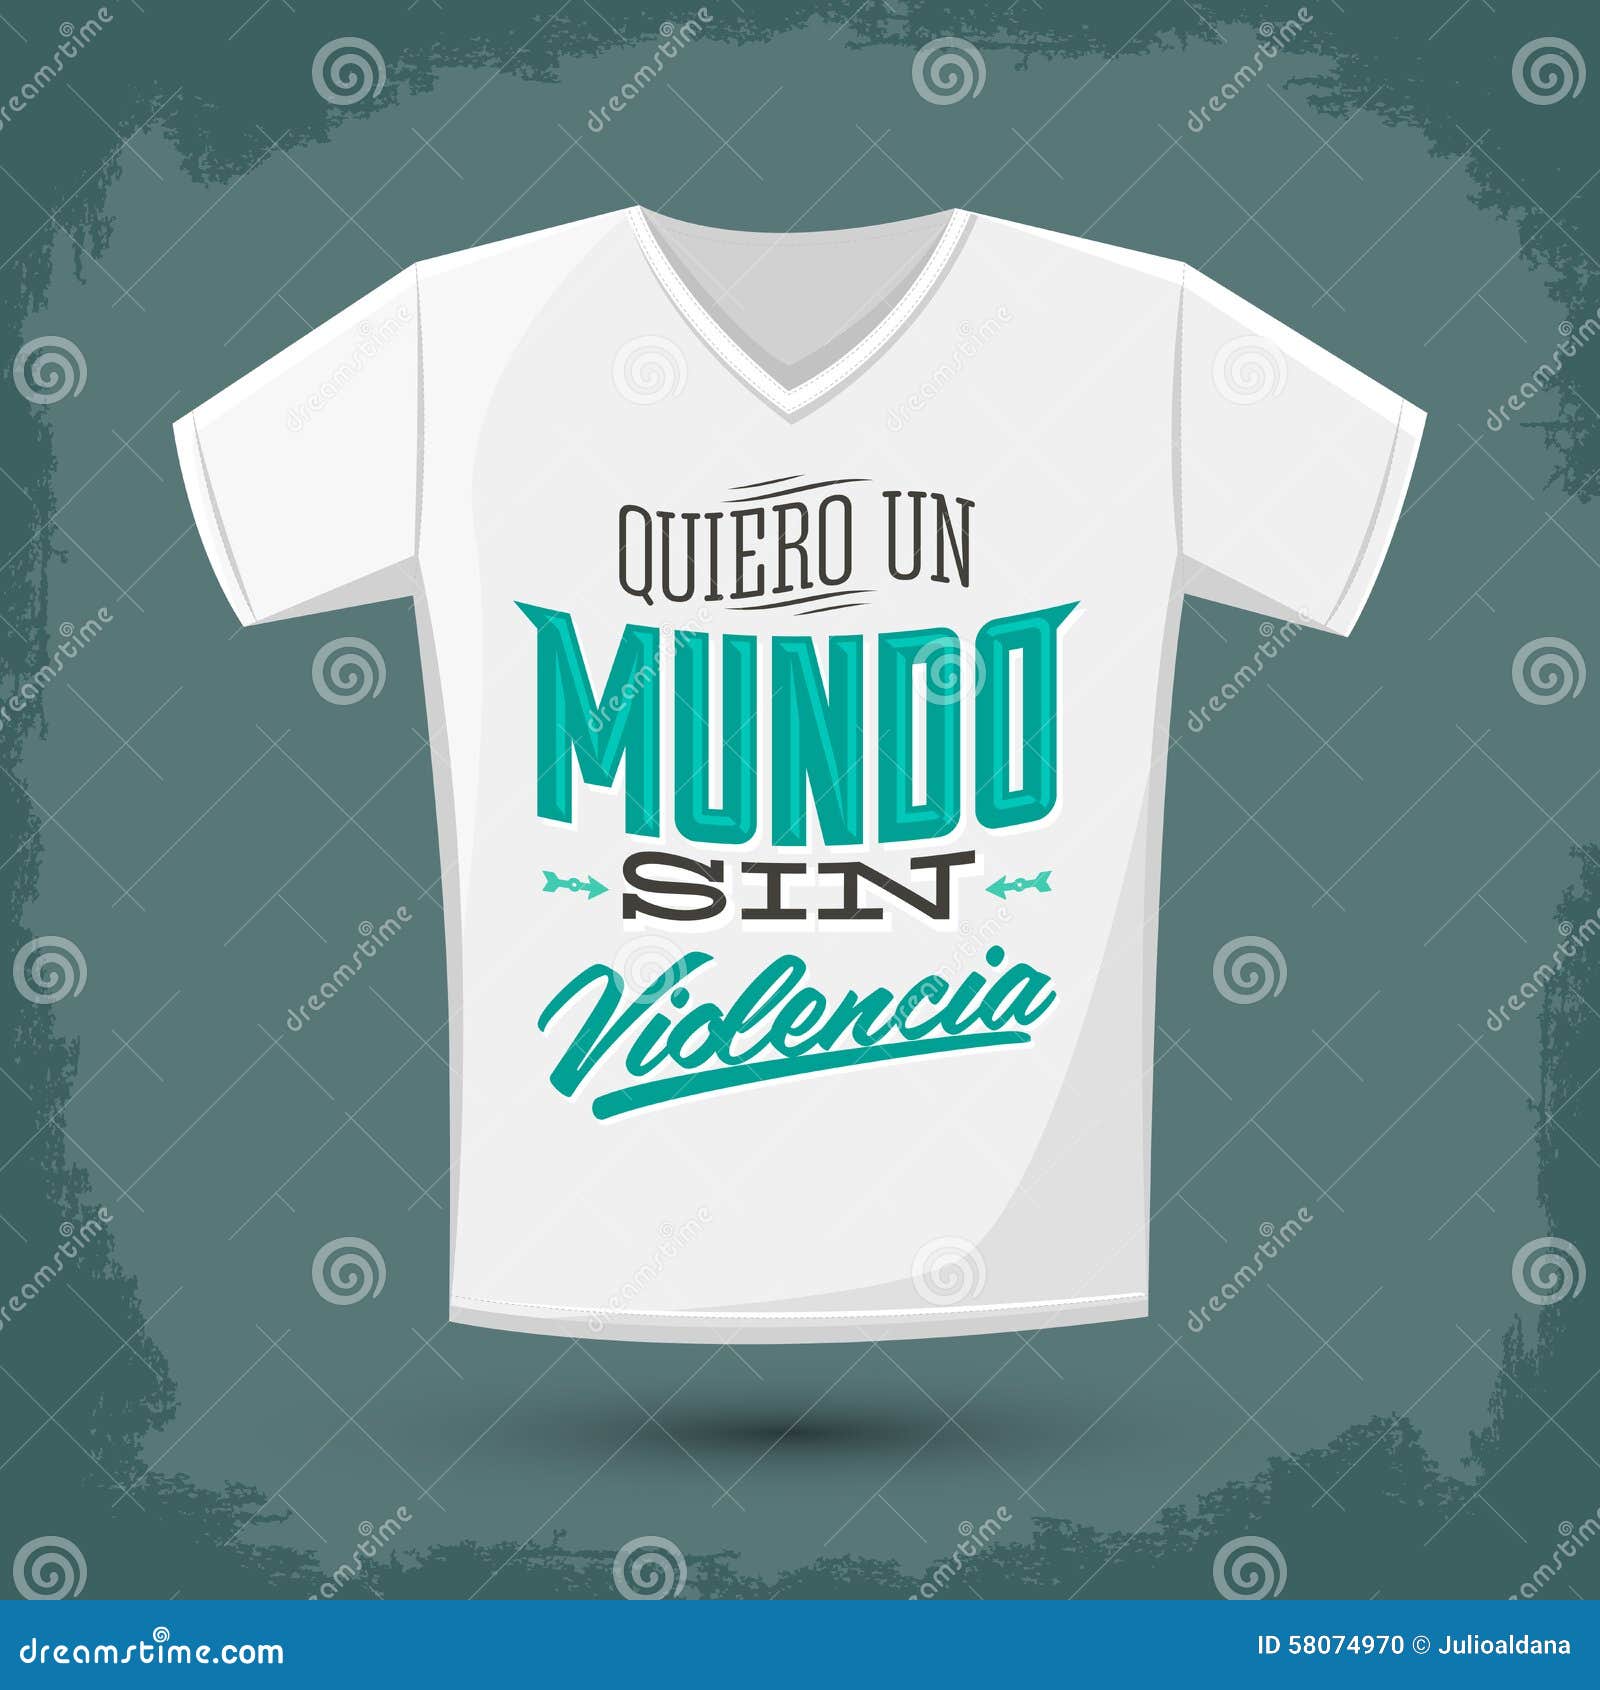 graphic t- shirt  - quiero un mundo sin violencia - i want a world without violence spanish text